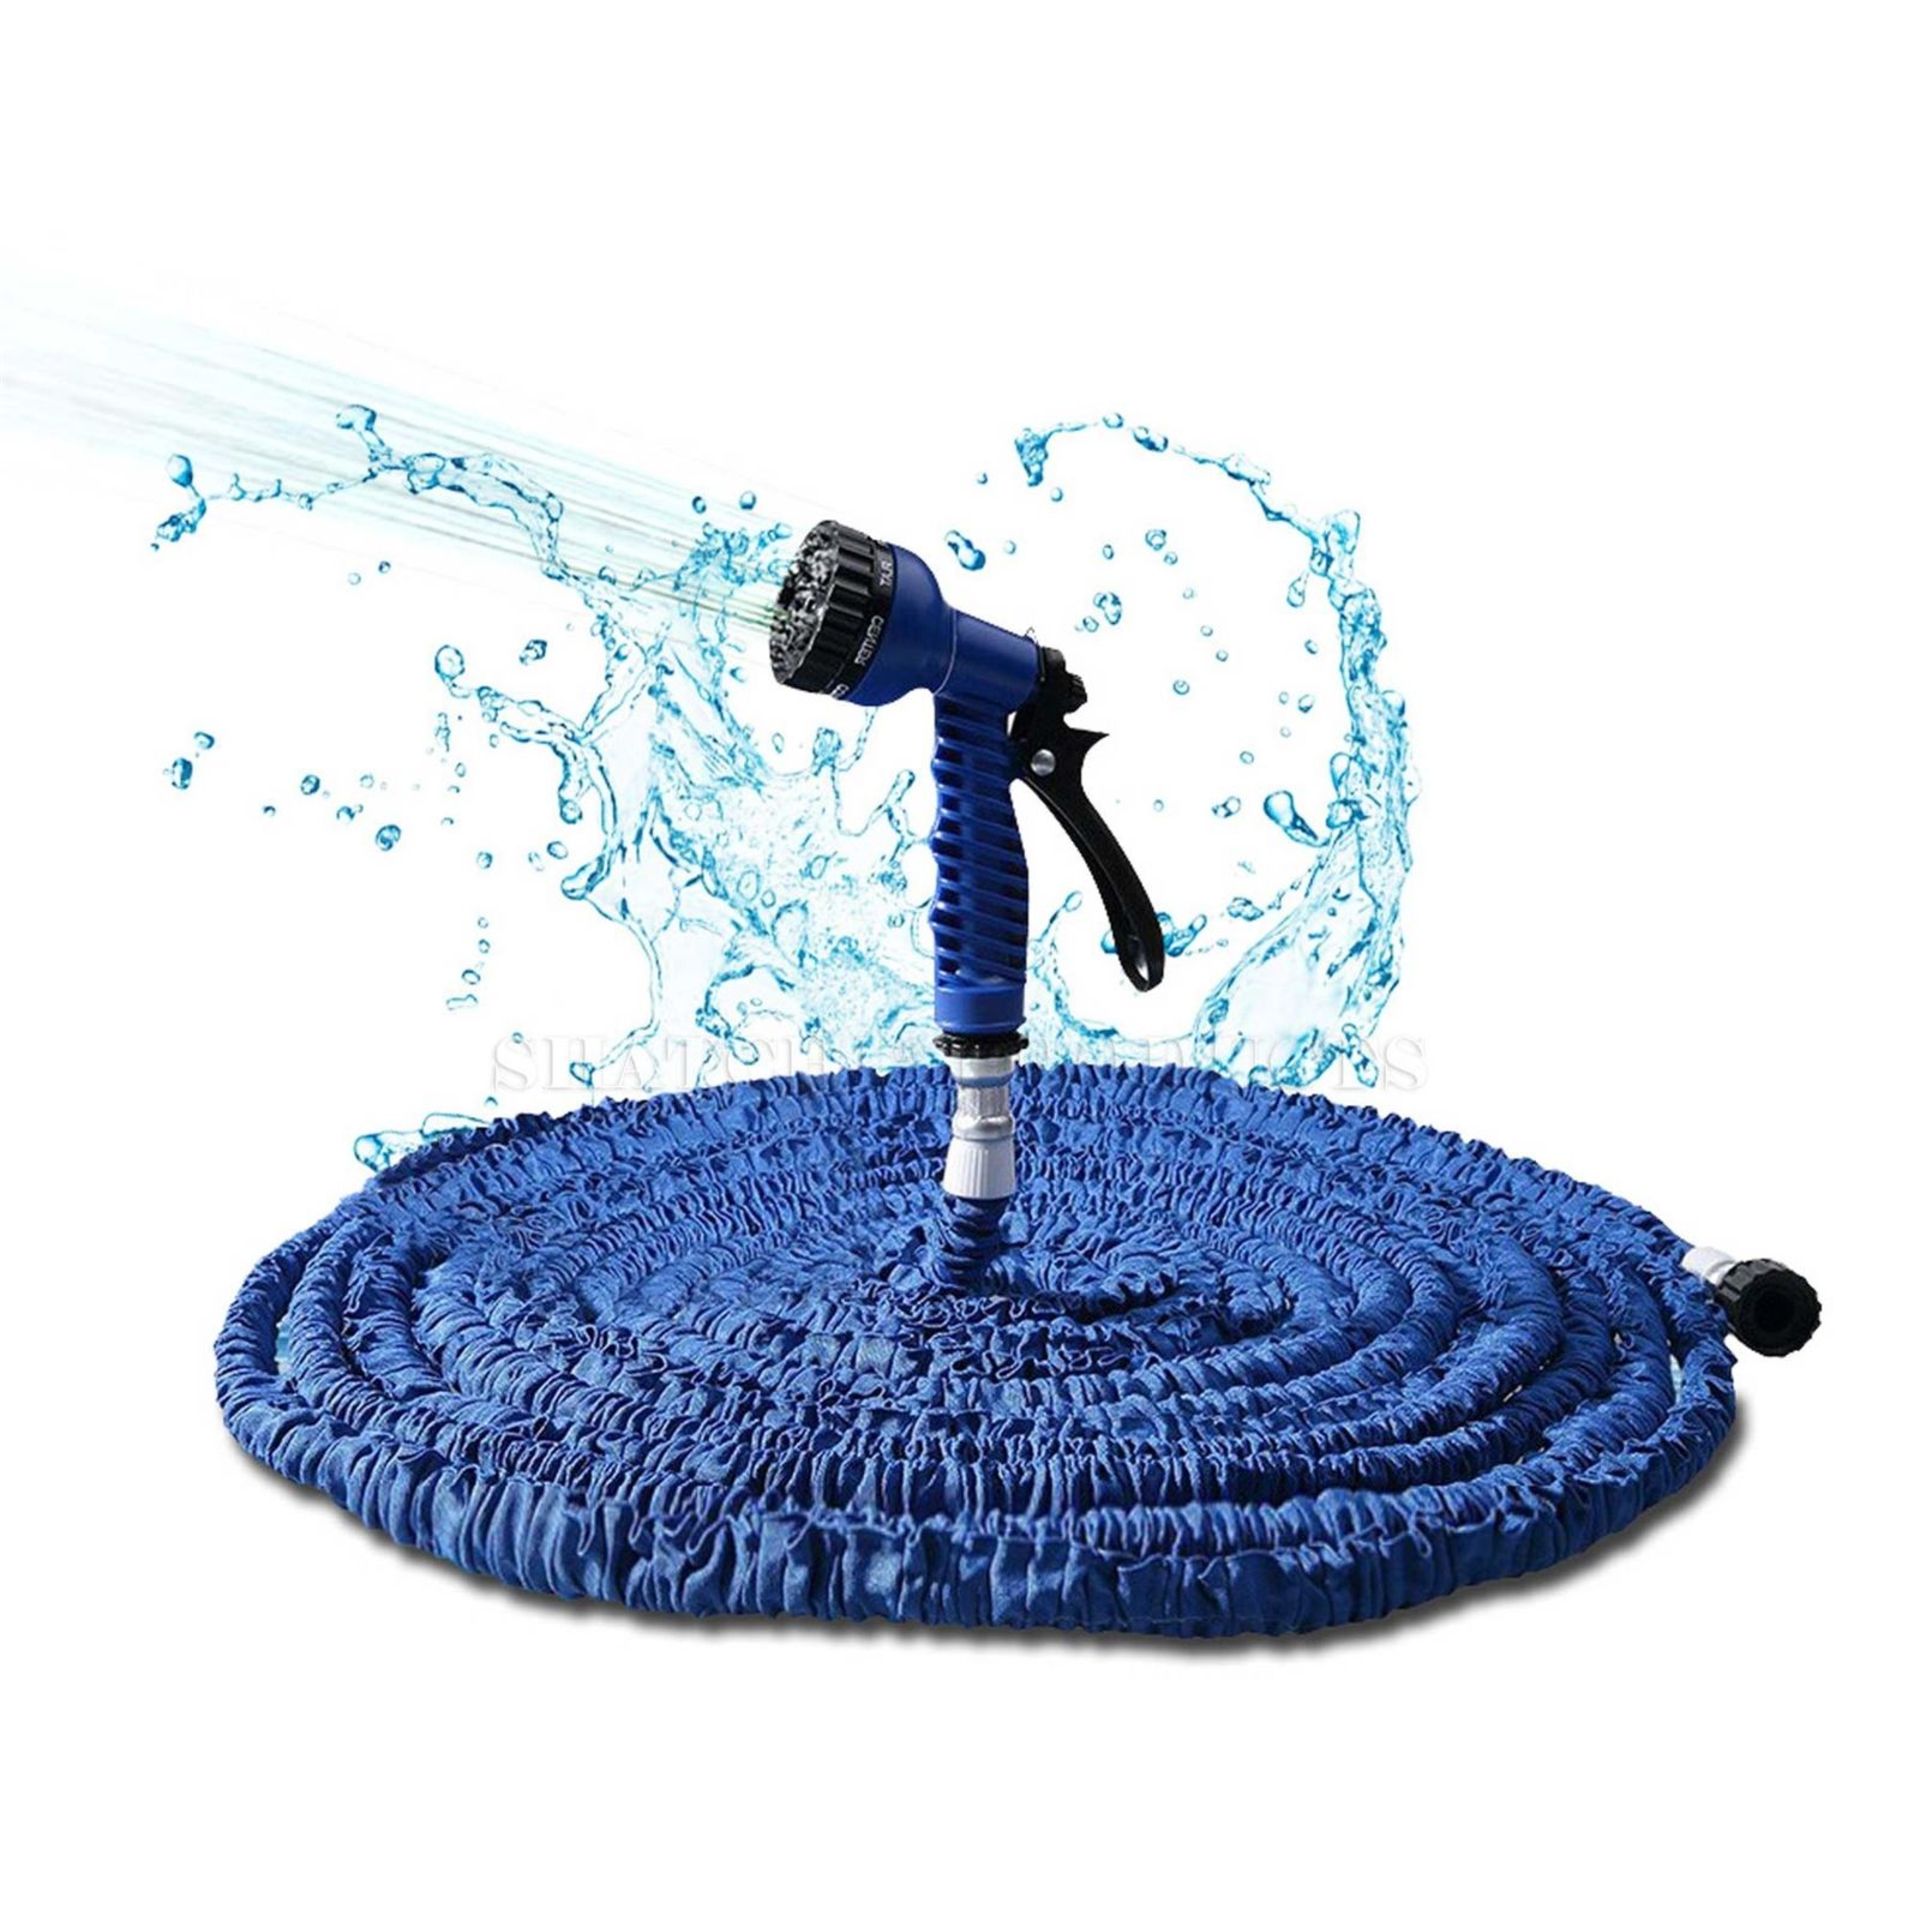 V Brand New 100 Foot (30 Metre) Incredible Magic Hose (As Seen On TV) - RRP 79 Euros - Automatically - Image 2 of 2